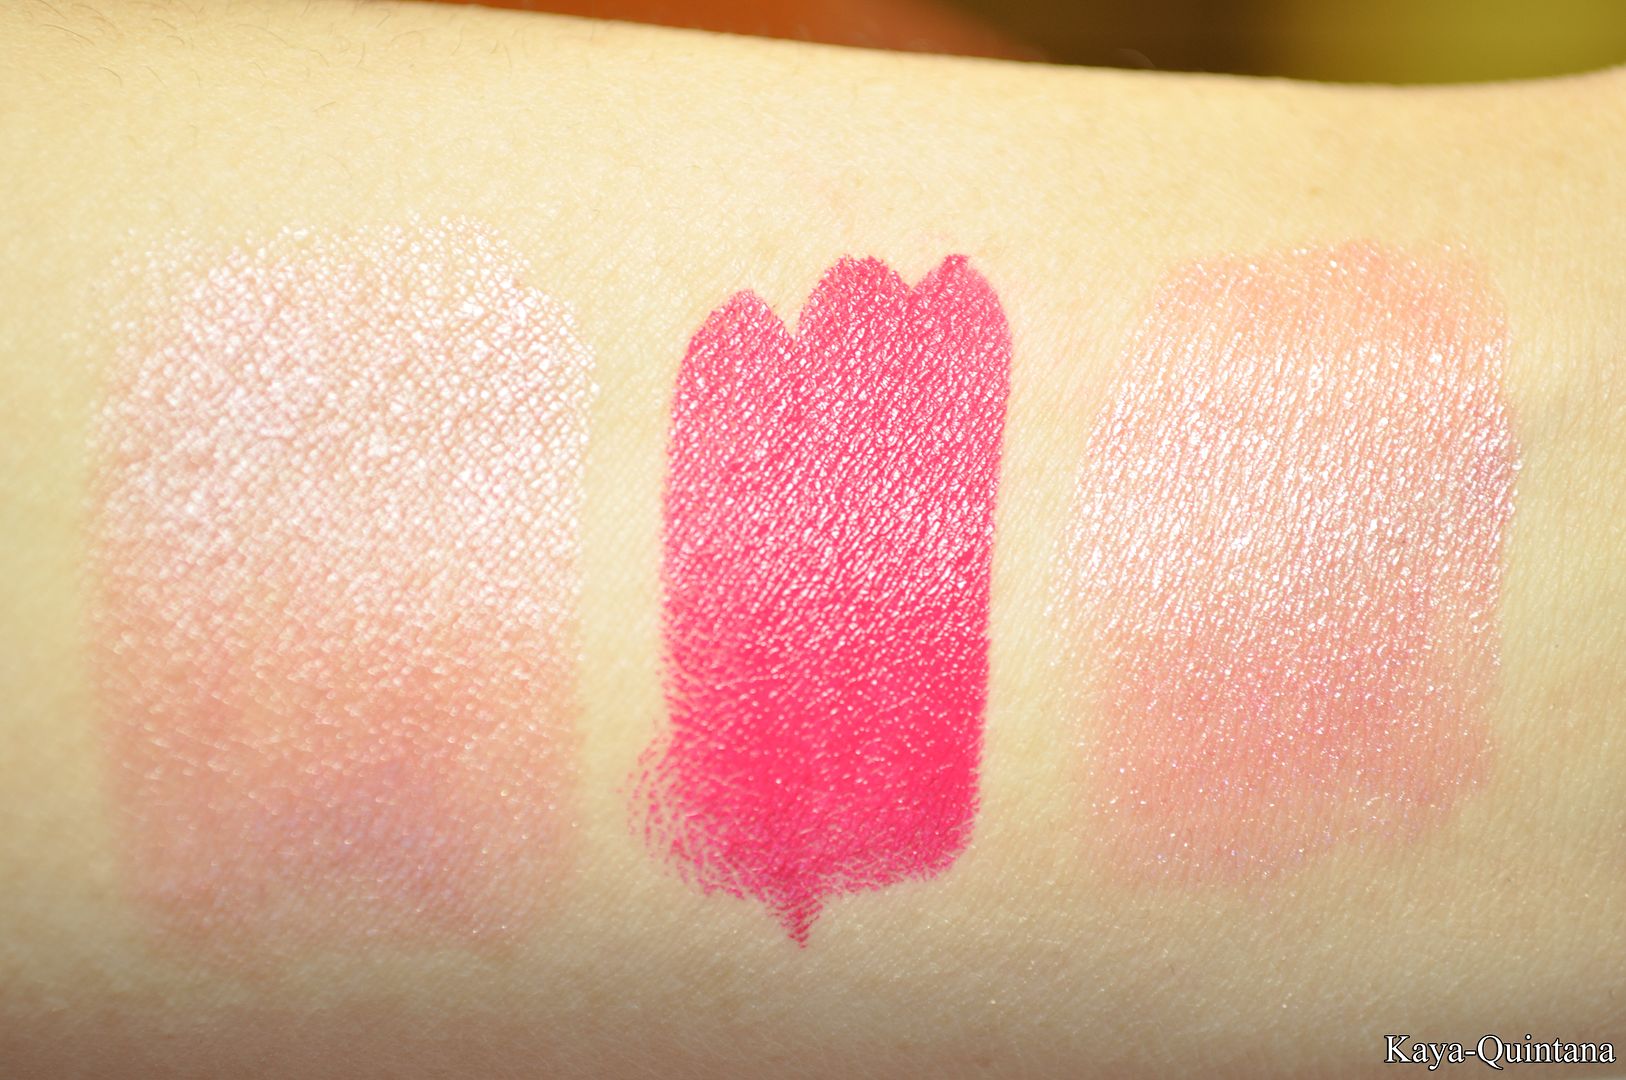 moisture renew lipstick fancy, nute or not to nude en as you want victoria